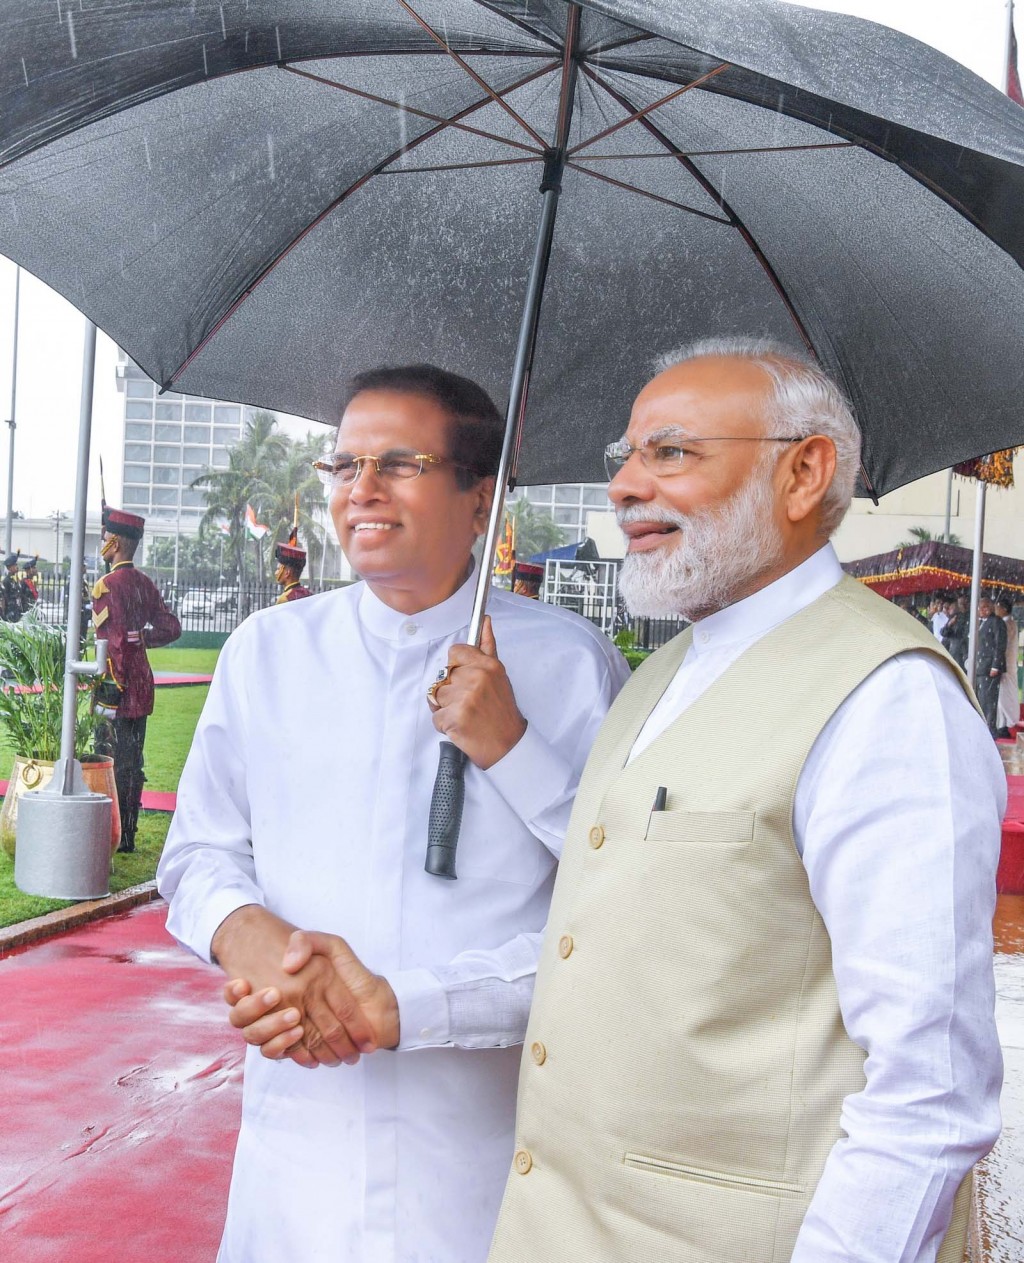 SRI LANKA - INDIA Colombo, Indian Prime Minister Modi pays tribute to the  victims of Easter terror (Photo)